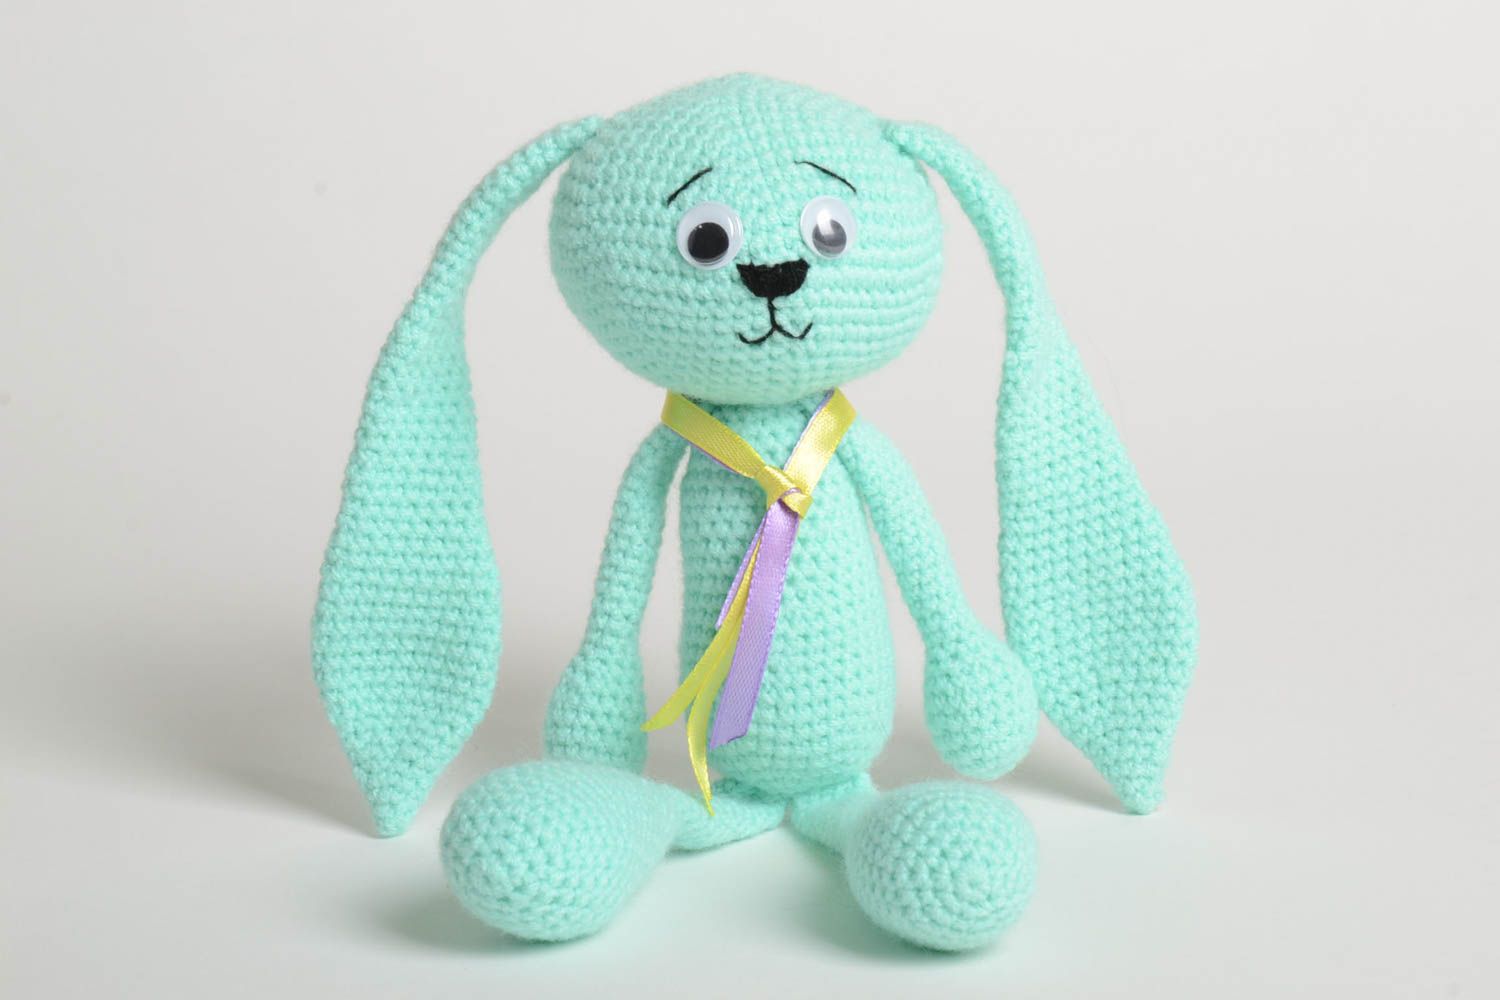 Beautiful handmade crochet soft toy stuffed toy best toys for kids gift ideas photo 2